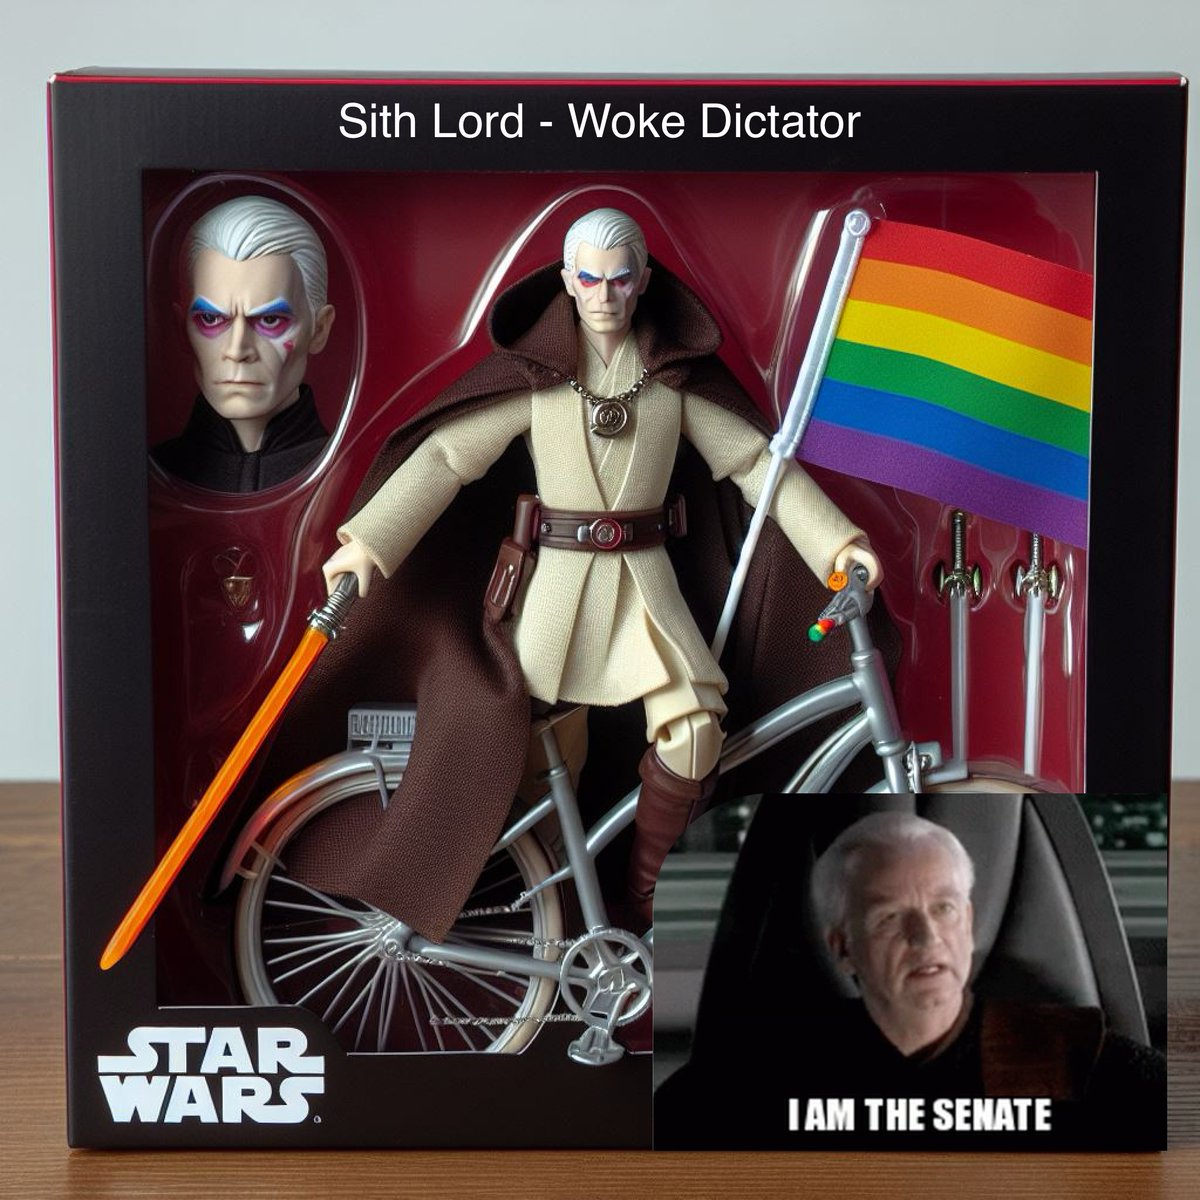 We're doing a little fundraiser for the dark side! Own the Anal Winde Action Figure! 🧢🇿🇦🍌☠️ DICKTATORIAL-Alliance.com